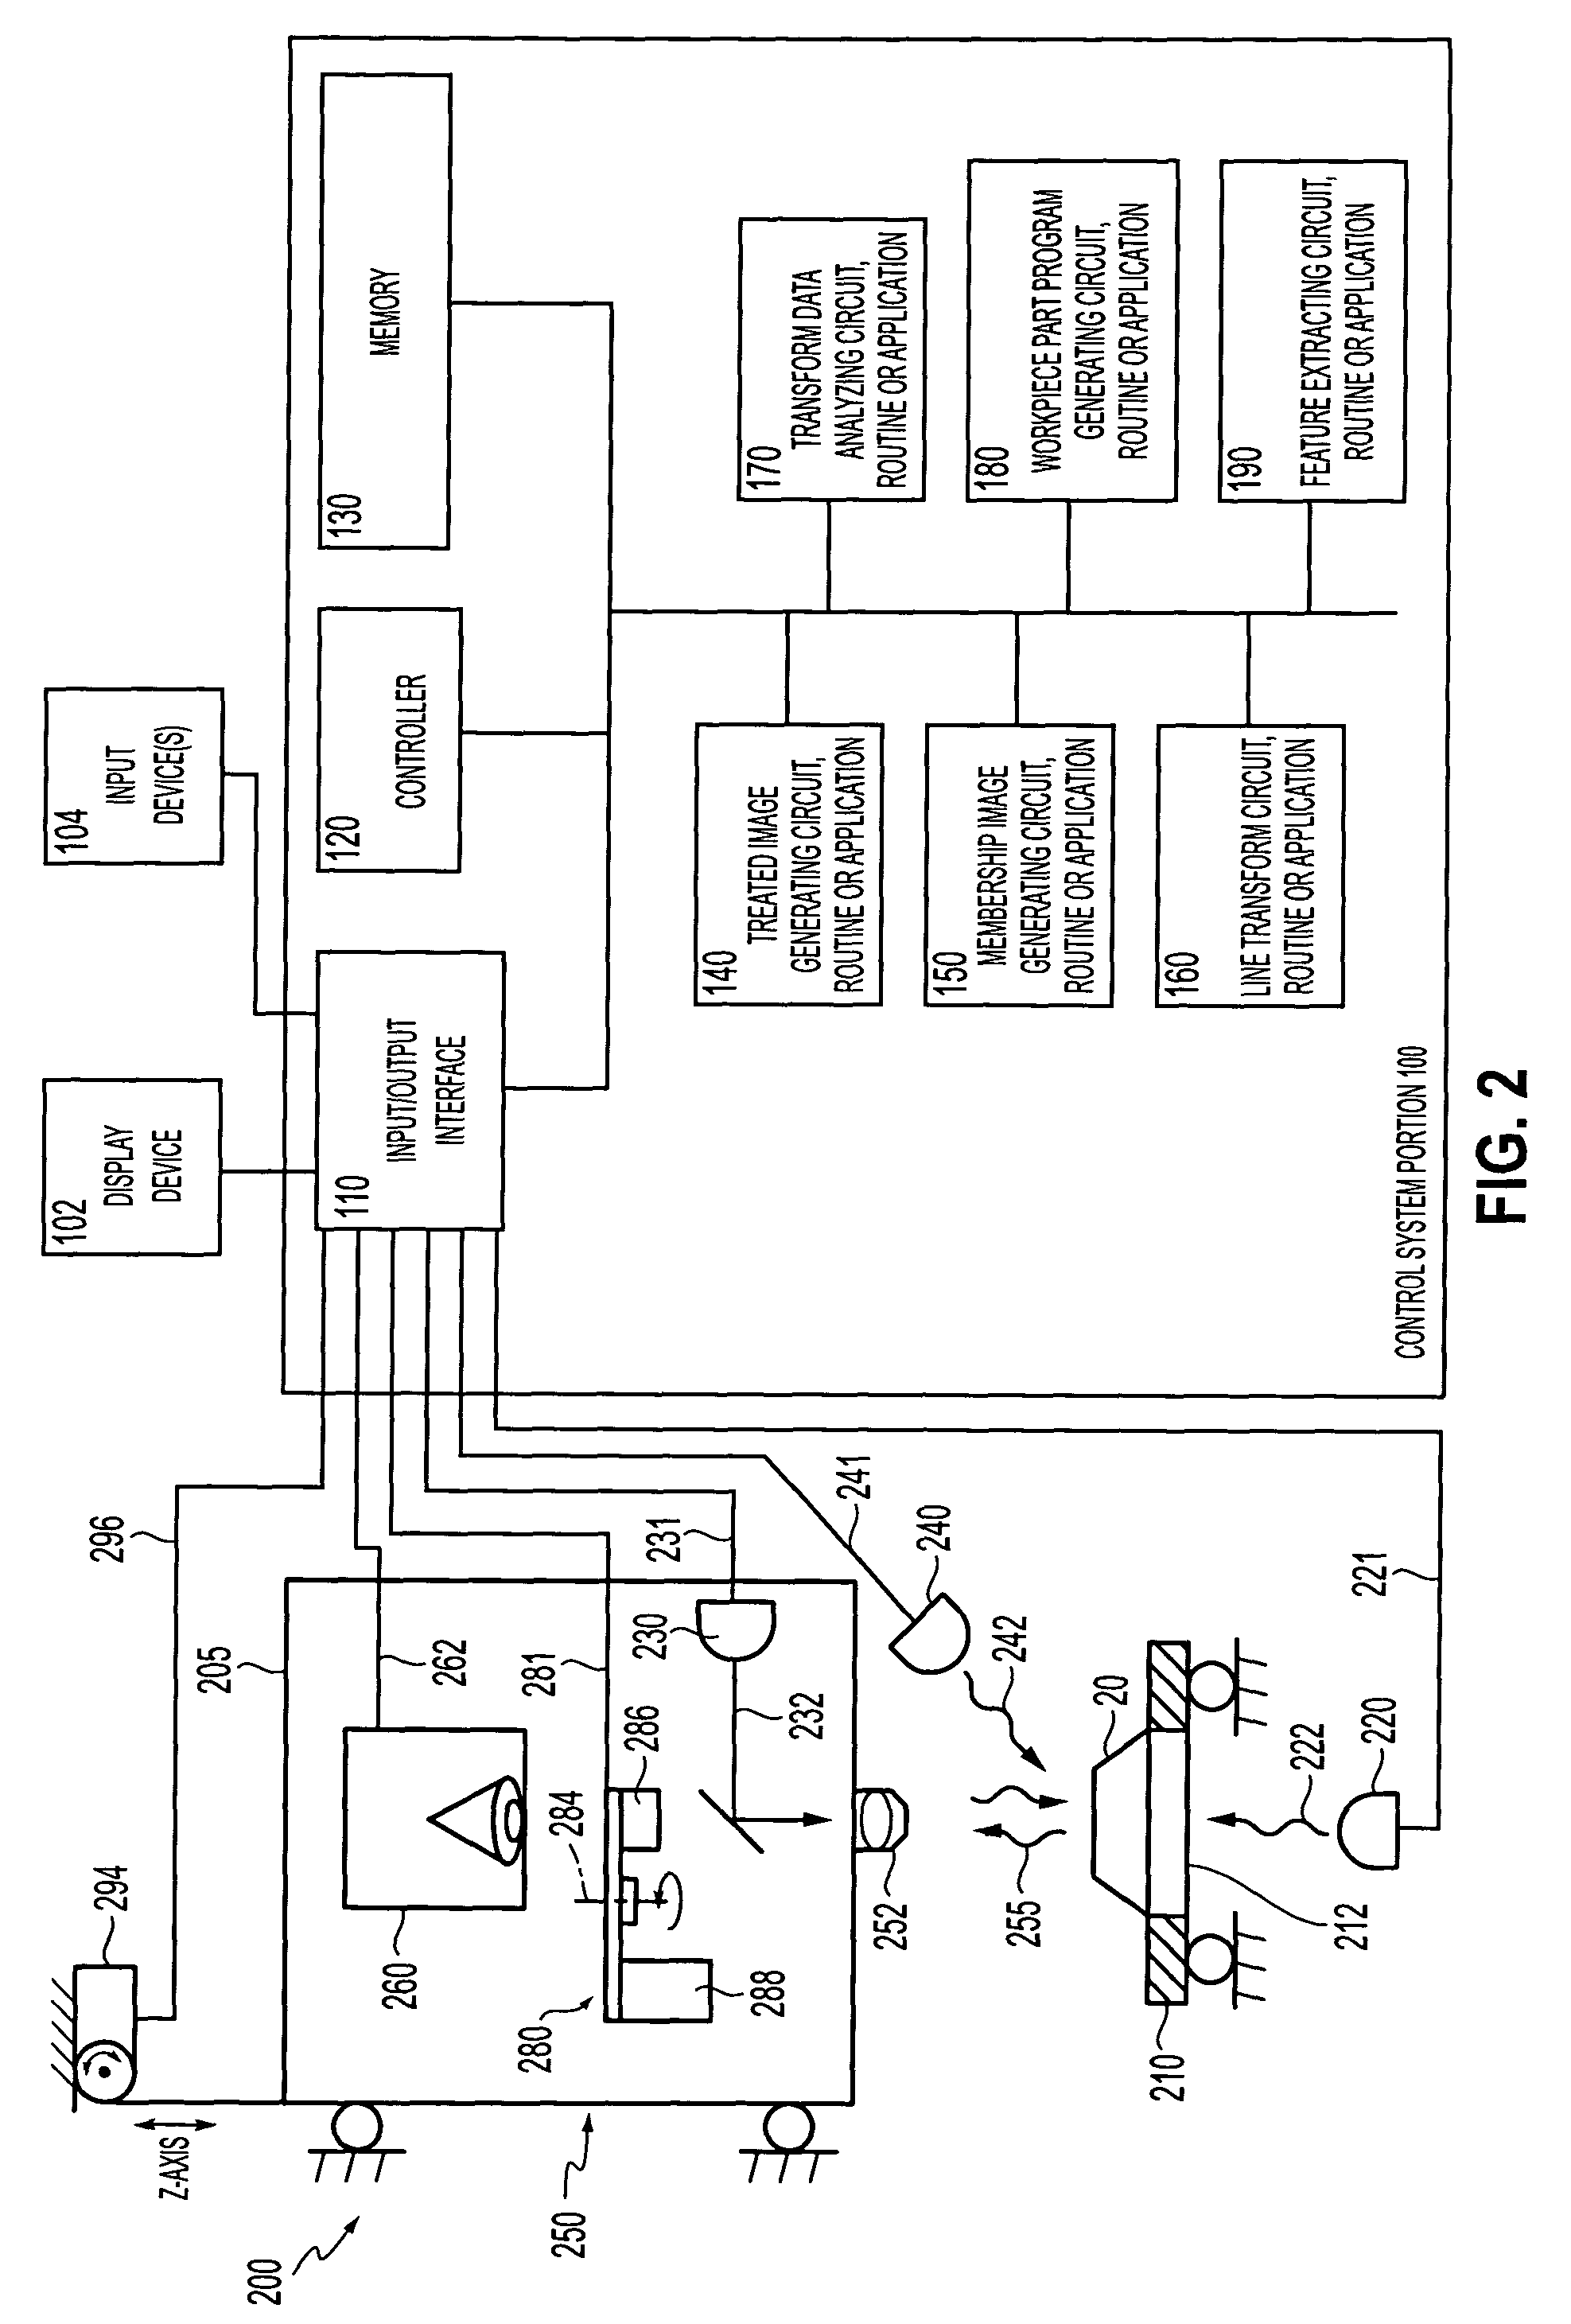 Methods and apparatus for inspection of lines embedded in highly textured material